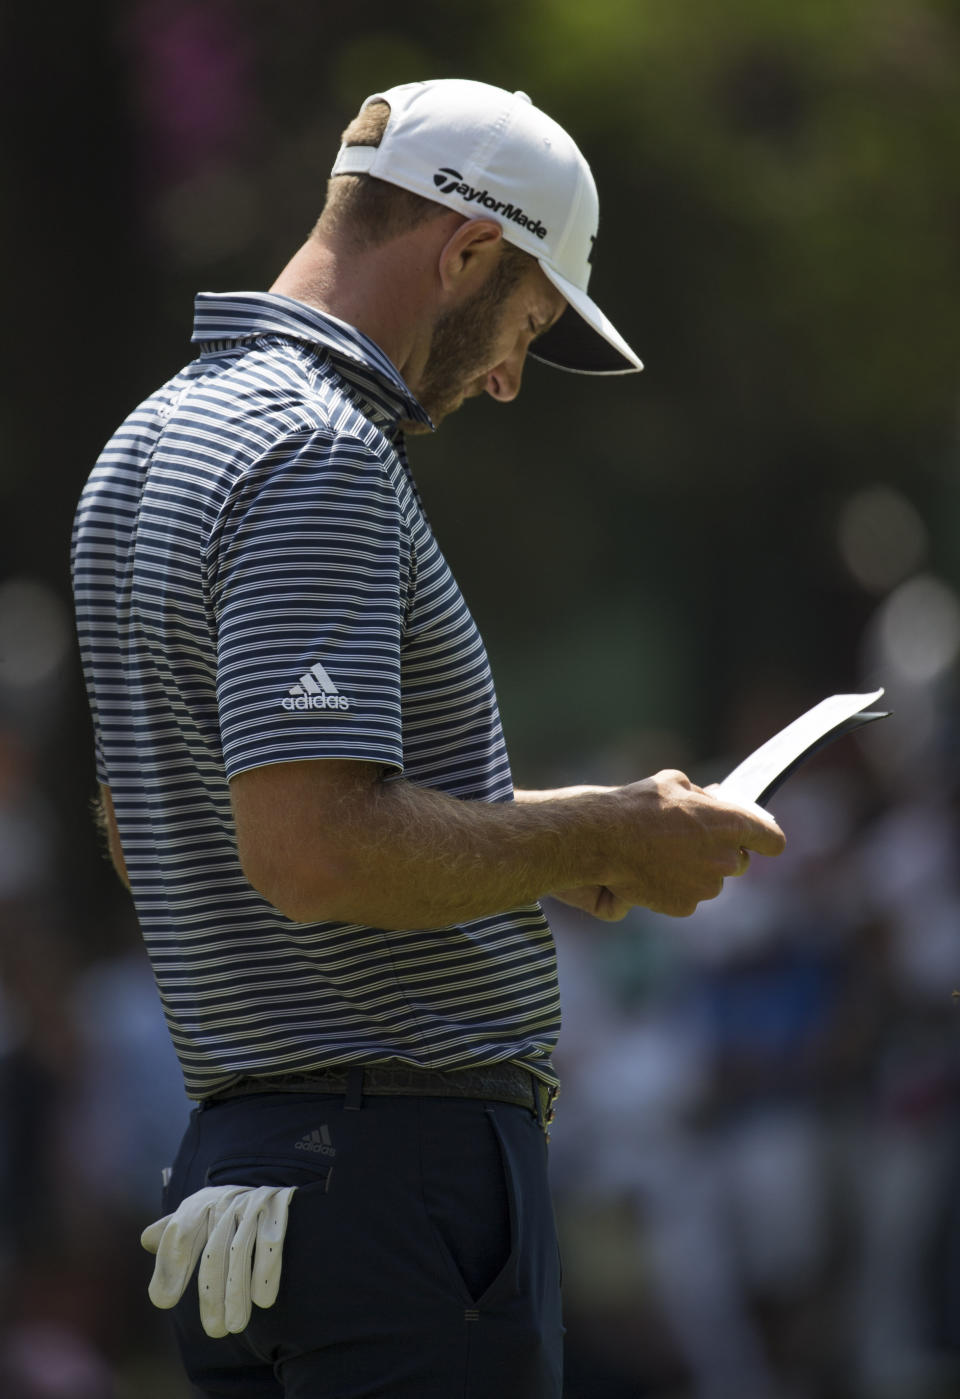 U.S golfer Dustin Johnson looks at his notes at the first hole during the WGC-Mexico Championship at the Chapultepec Golf Club in Mexico City, Sunday, Feb. 24, 2019. (AP Photo/Christian Palma)